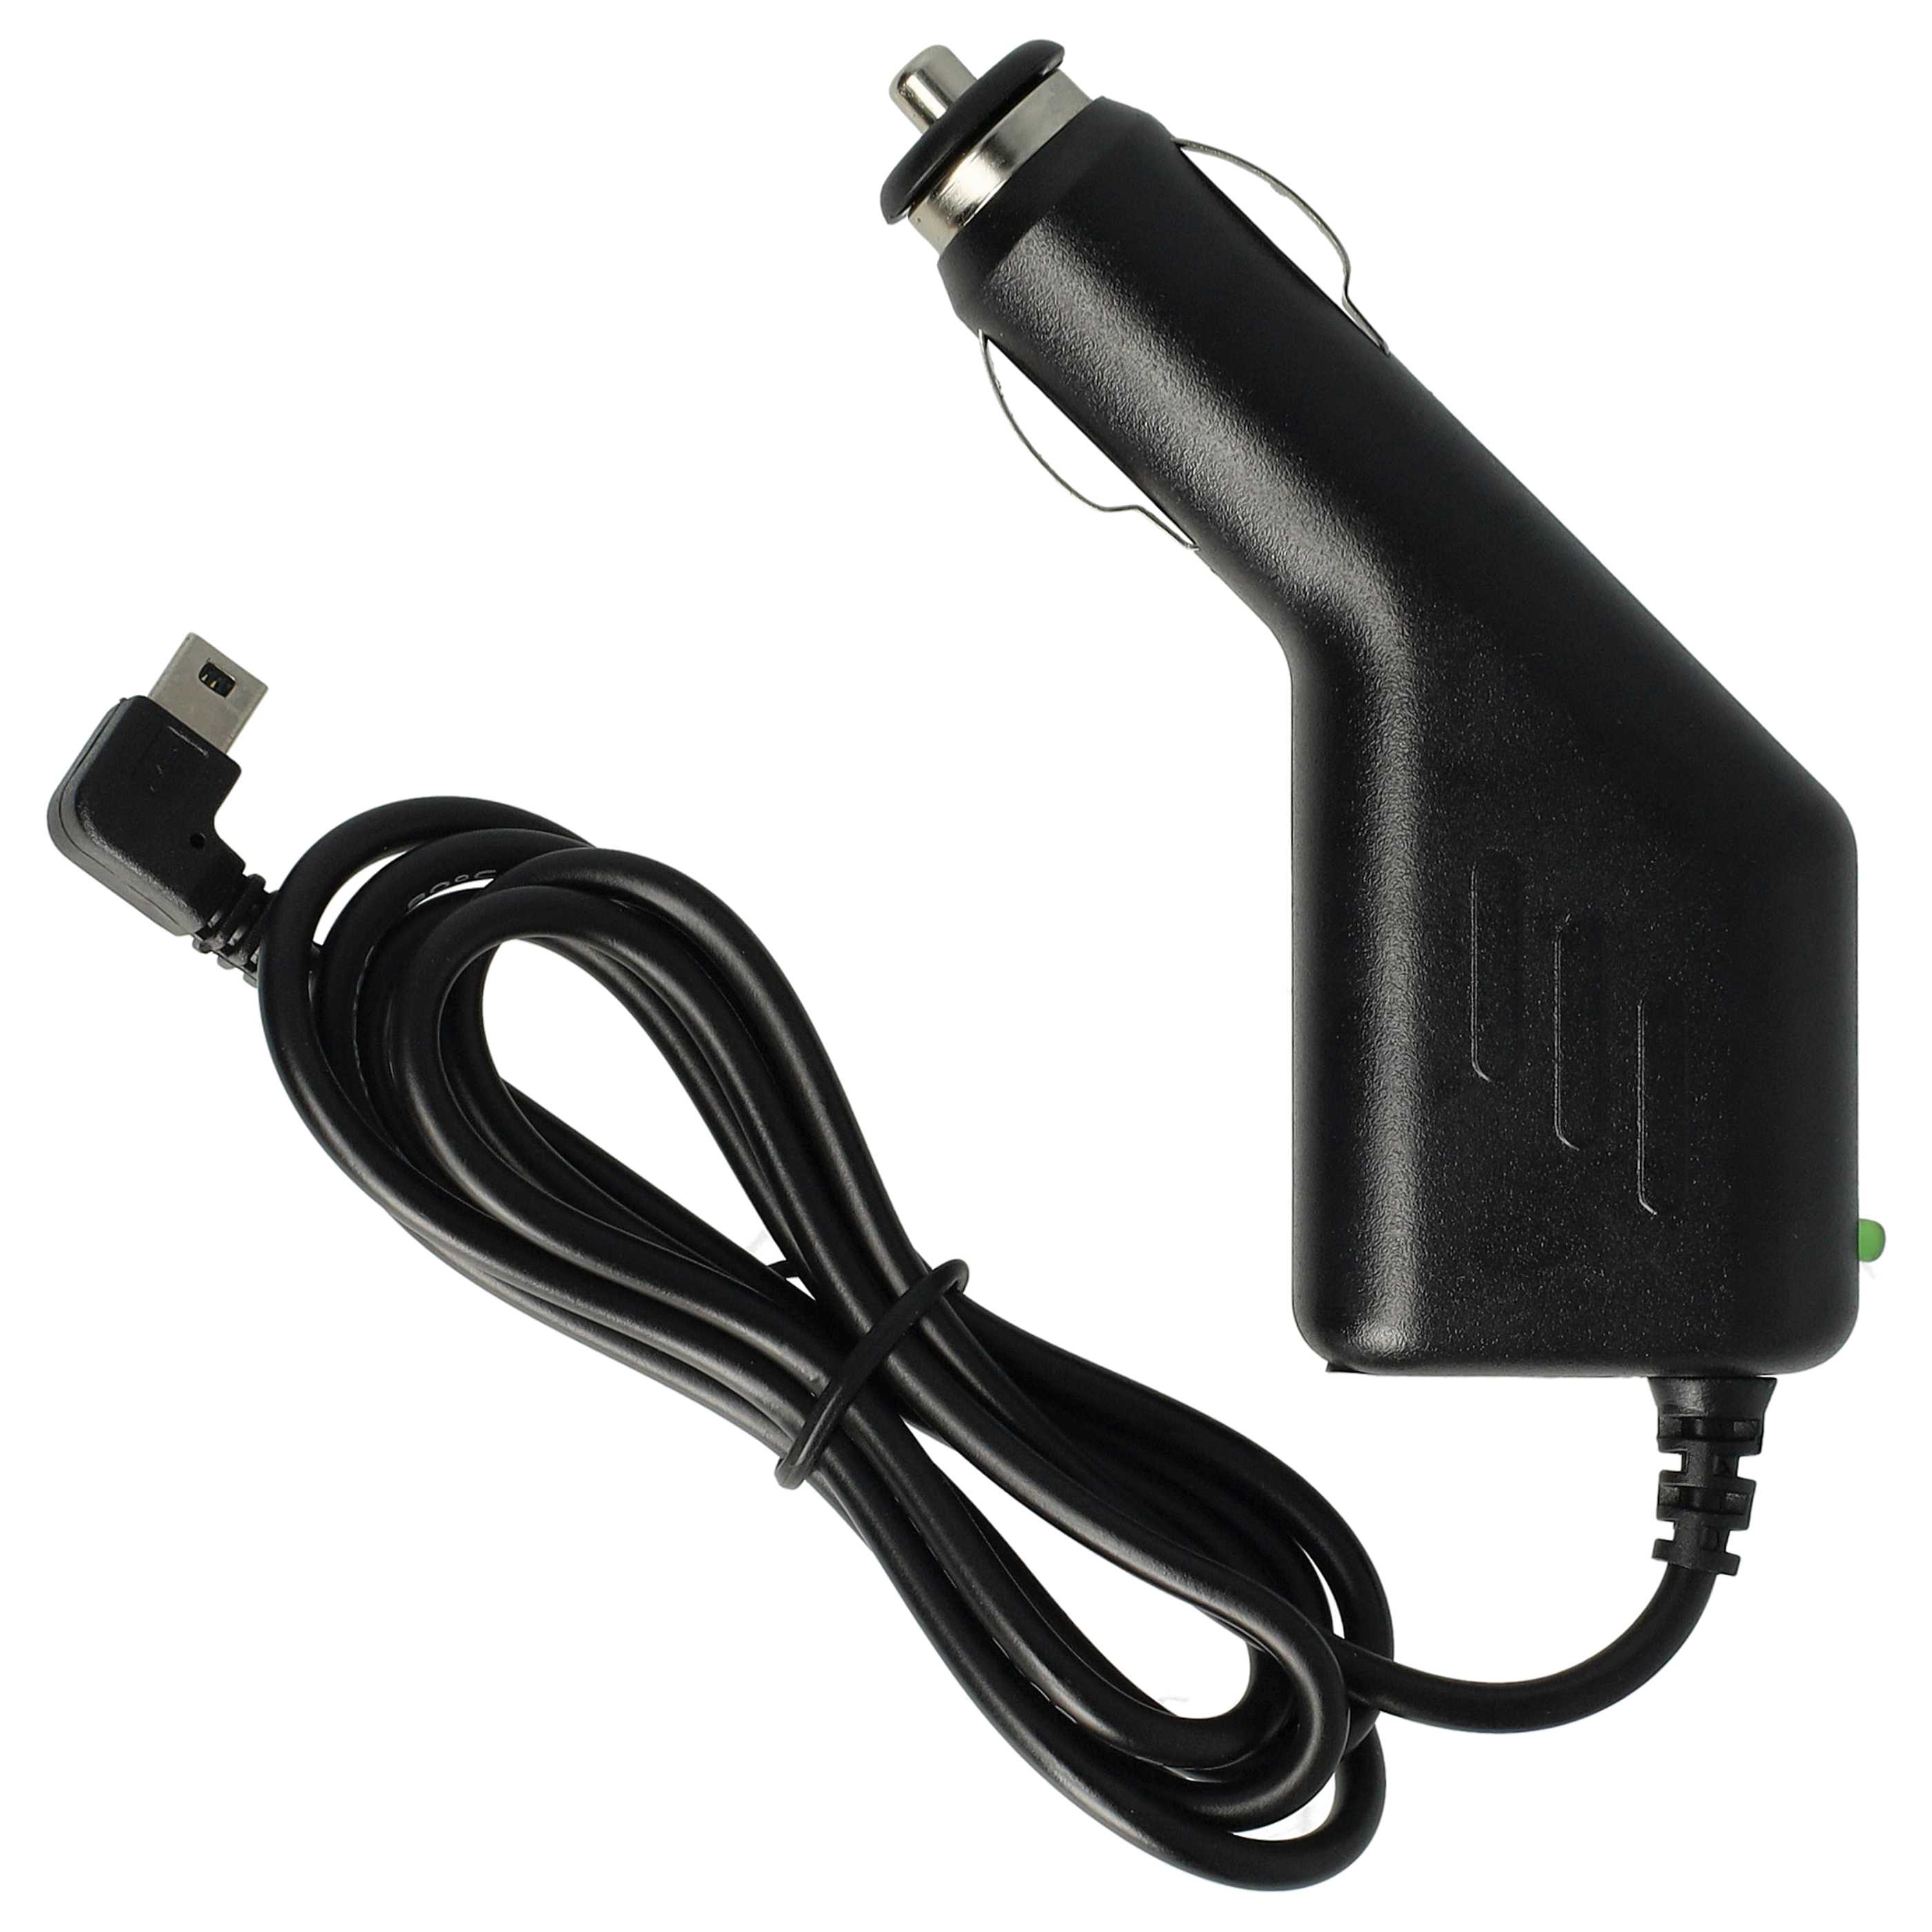 Mini-USB Car Charger Cable 1.0 A suitable forDevices like GPS, Sat Navs, 90° Plug